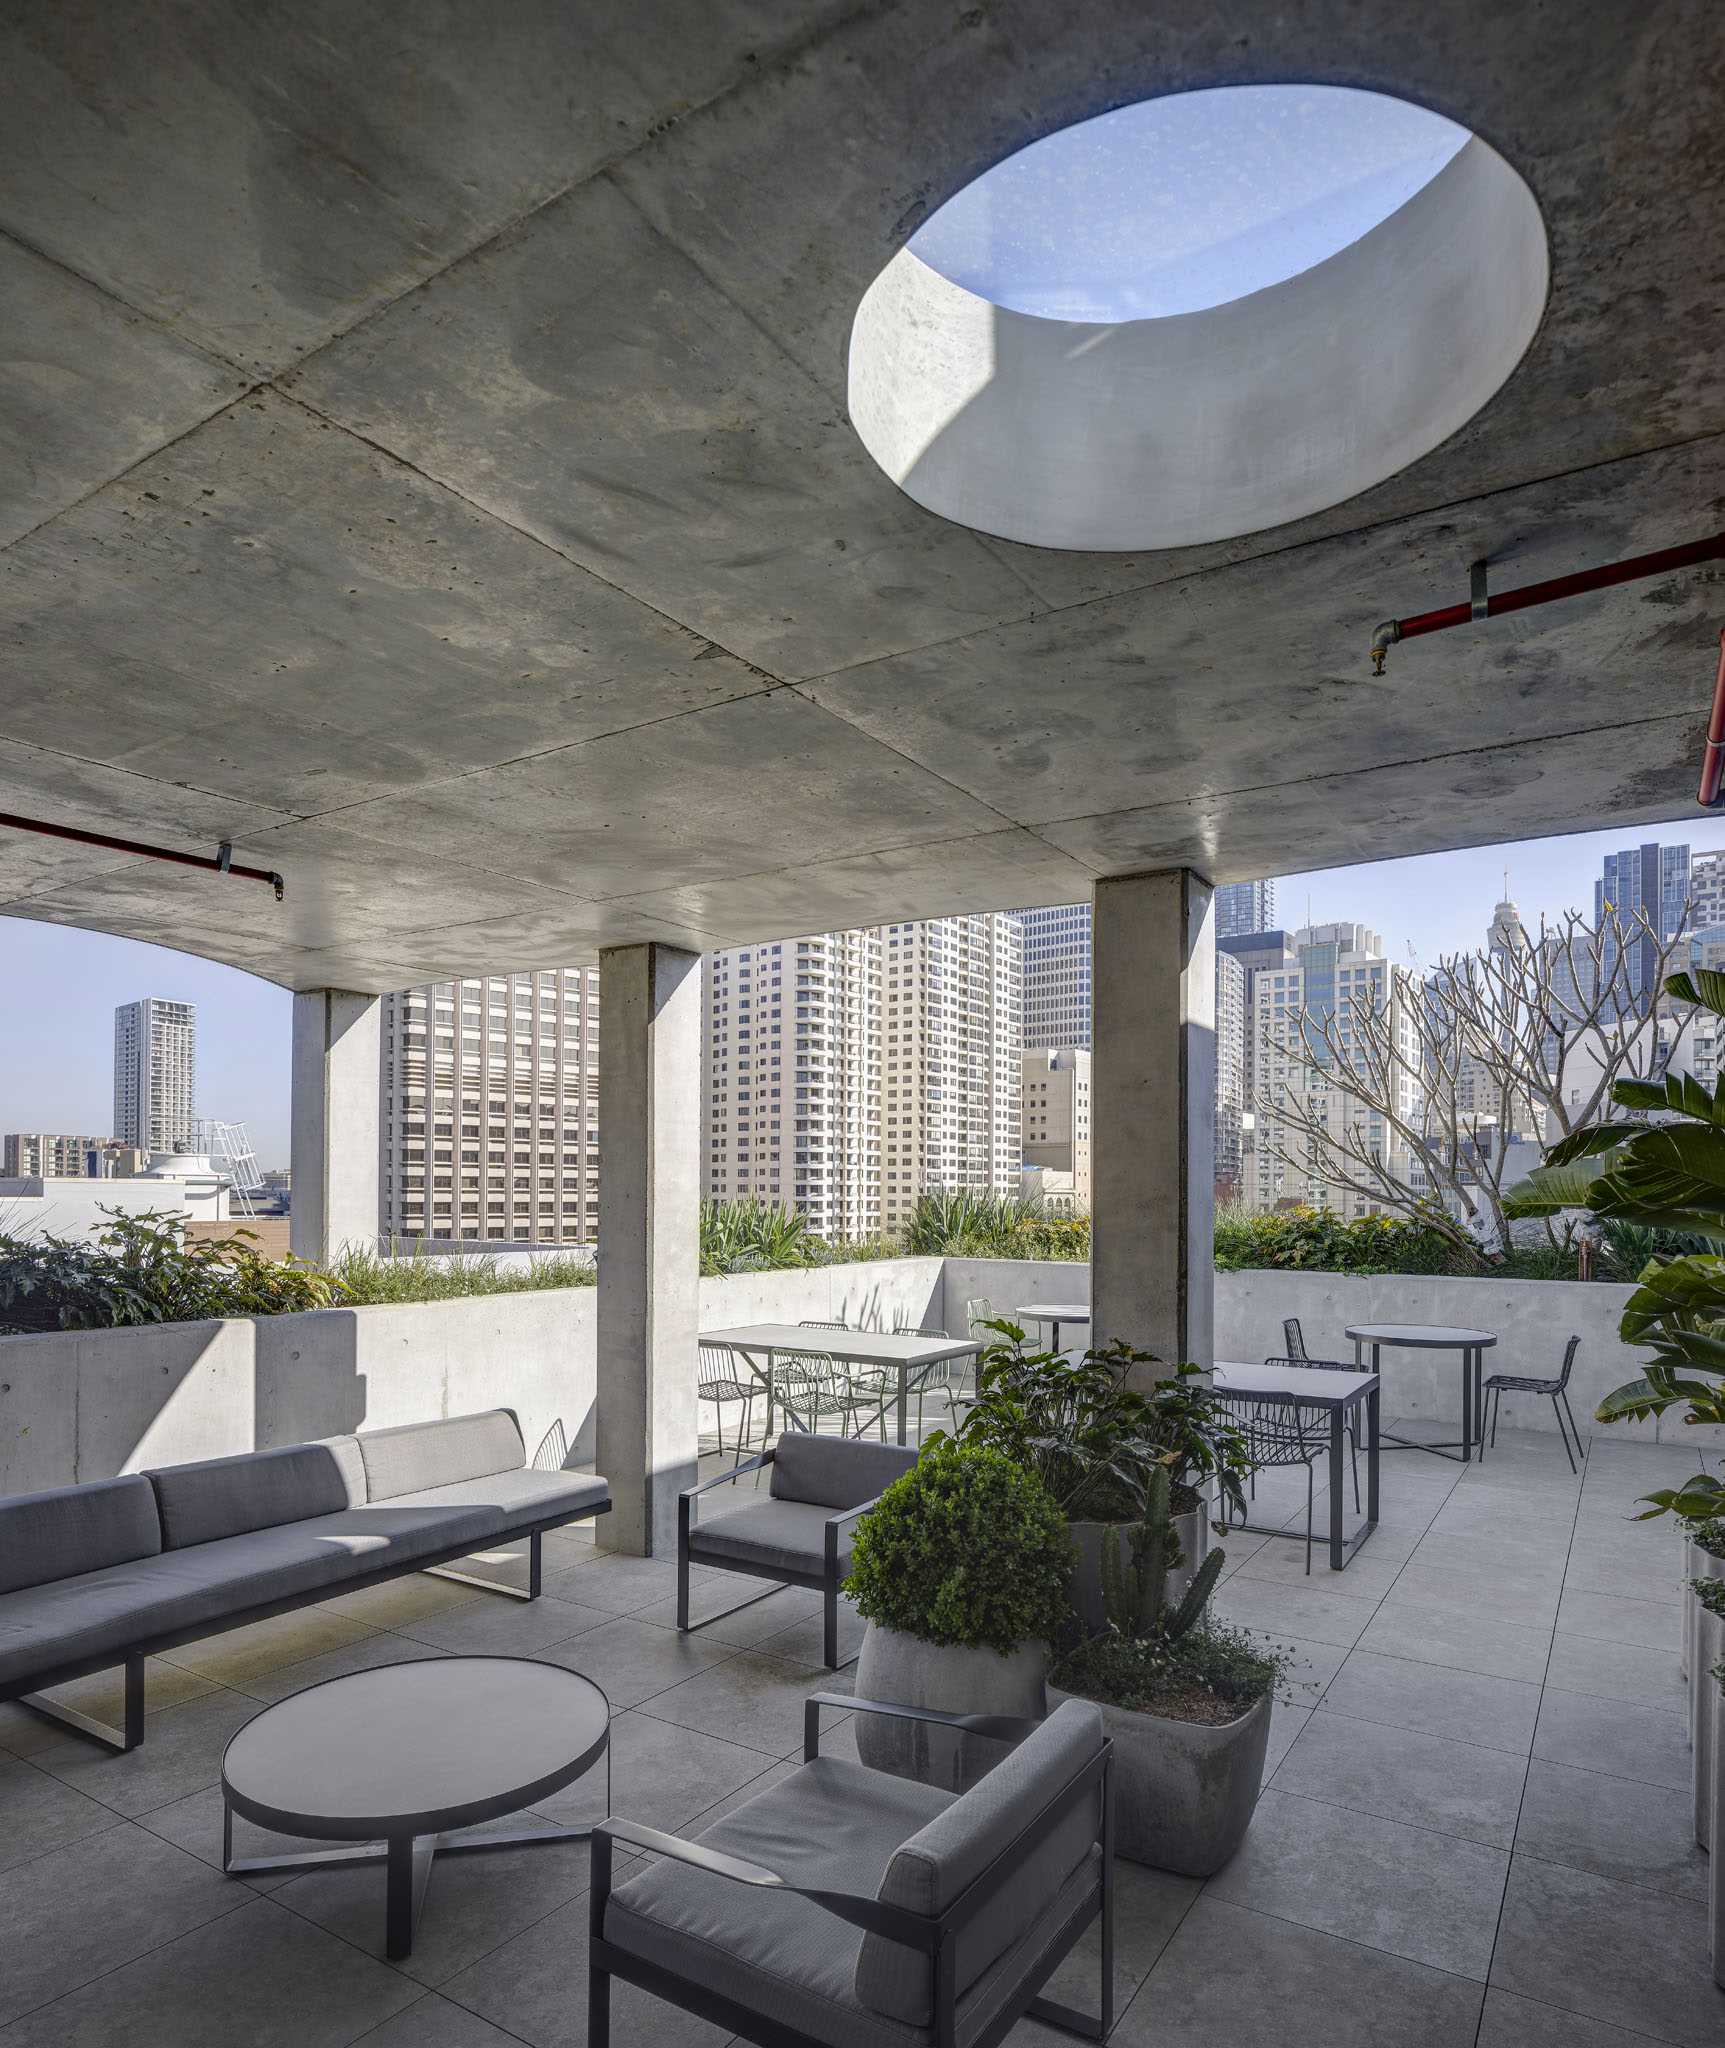 A rooftop patio with built-in concrete planters wrapping around the exterior, and multiple different seating areas.